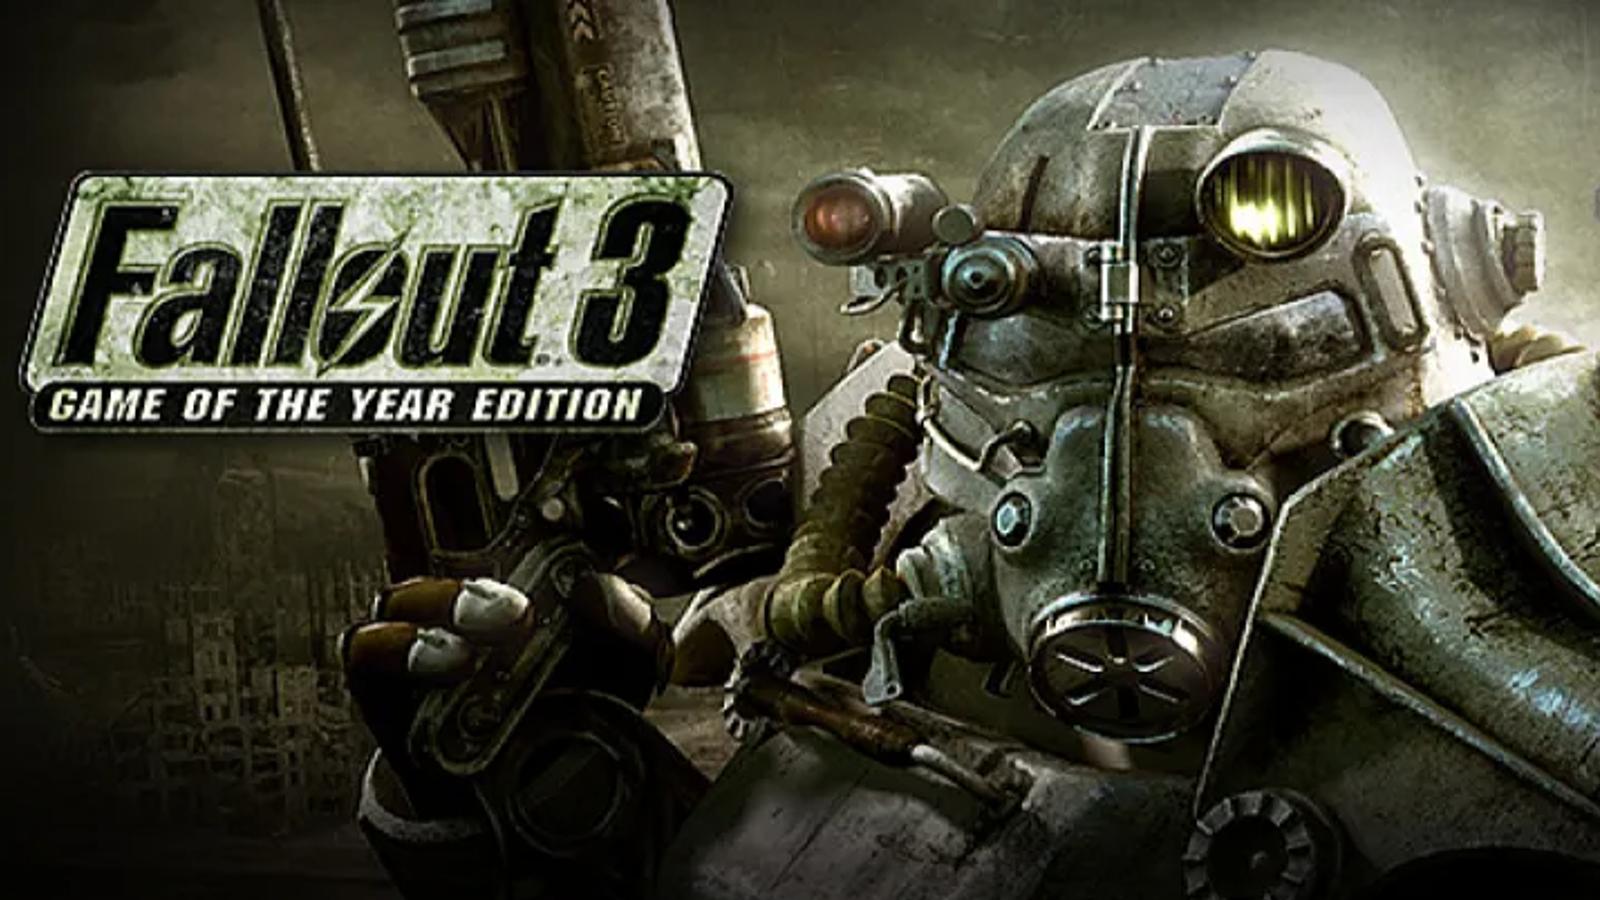 New trailer released for the Fallout 3 Remake in Fallout 4 Engine, Fallout  4: The Capital Wasteland